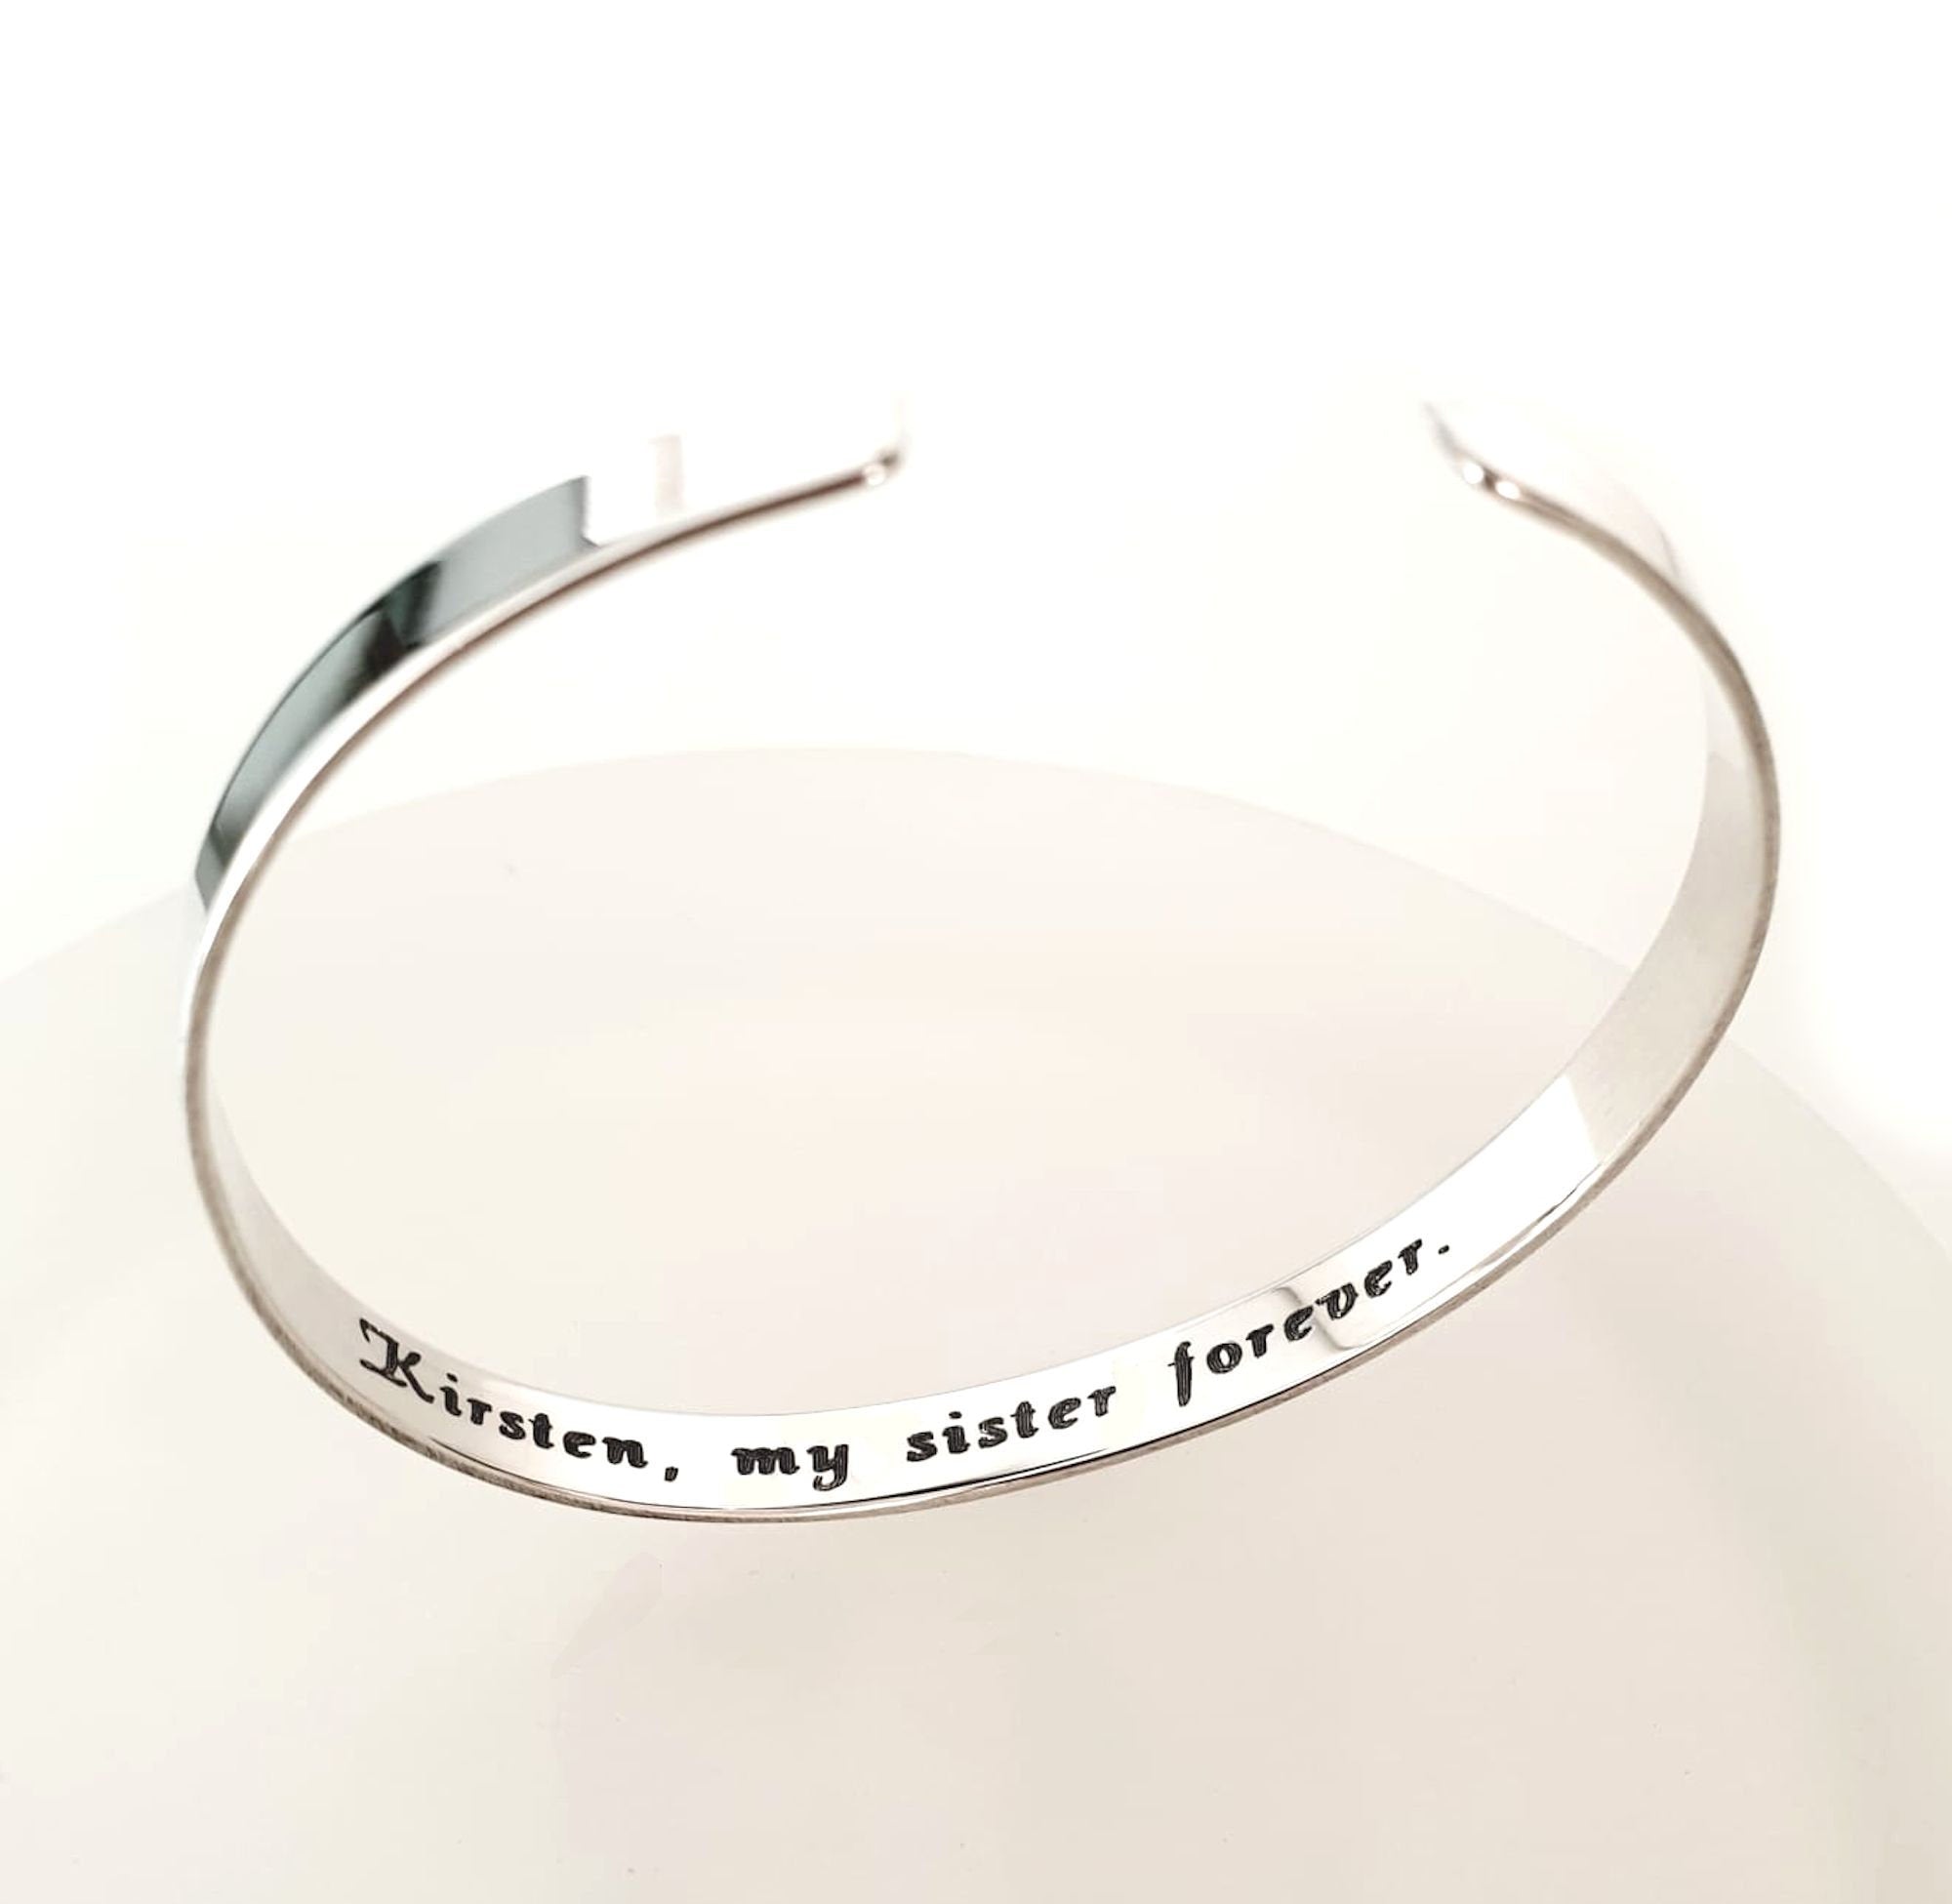 Carviell Bracelets for Women, Personalized Gifts for Her, Mom, Best Friend,  Inspirational Friendship Cuff for Teen Girls, Engraved, Birthday Gift  Jewelry, Adjustable, Stainless Steel, no gemstone : Buy Online at Best Price